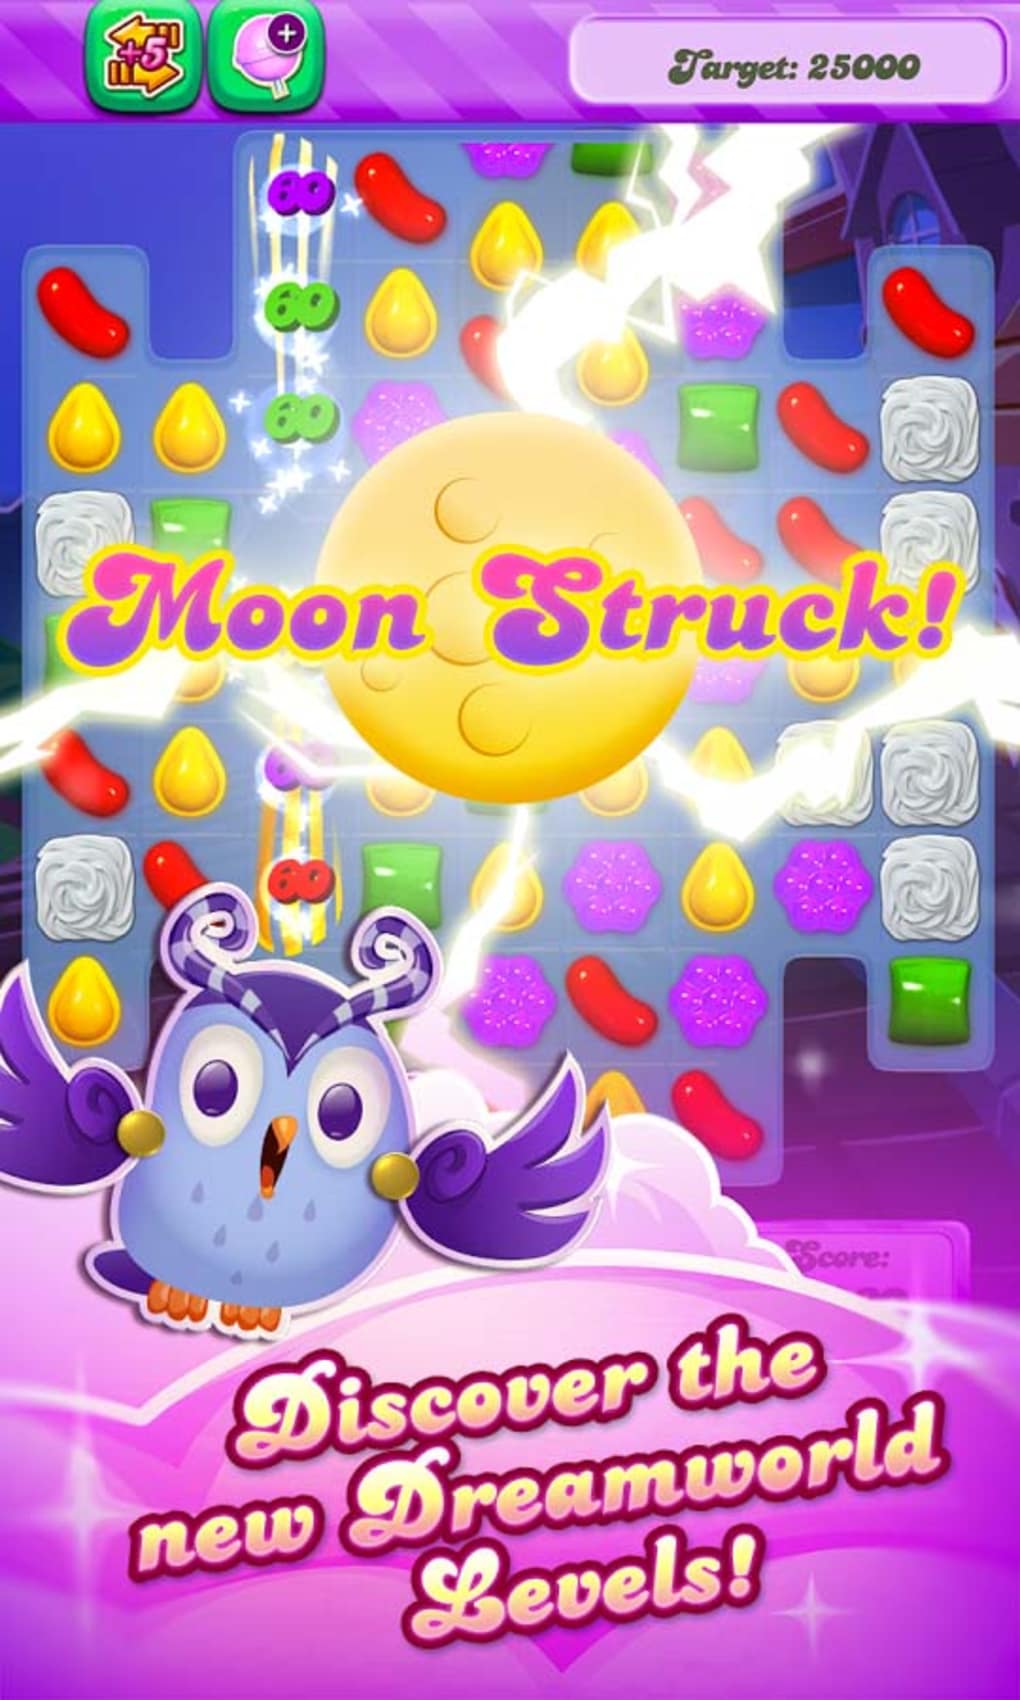 Candy Crushed - Candy Crush Saga Online – Play Free in Browser